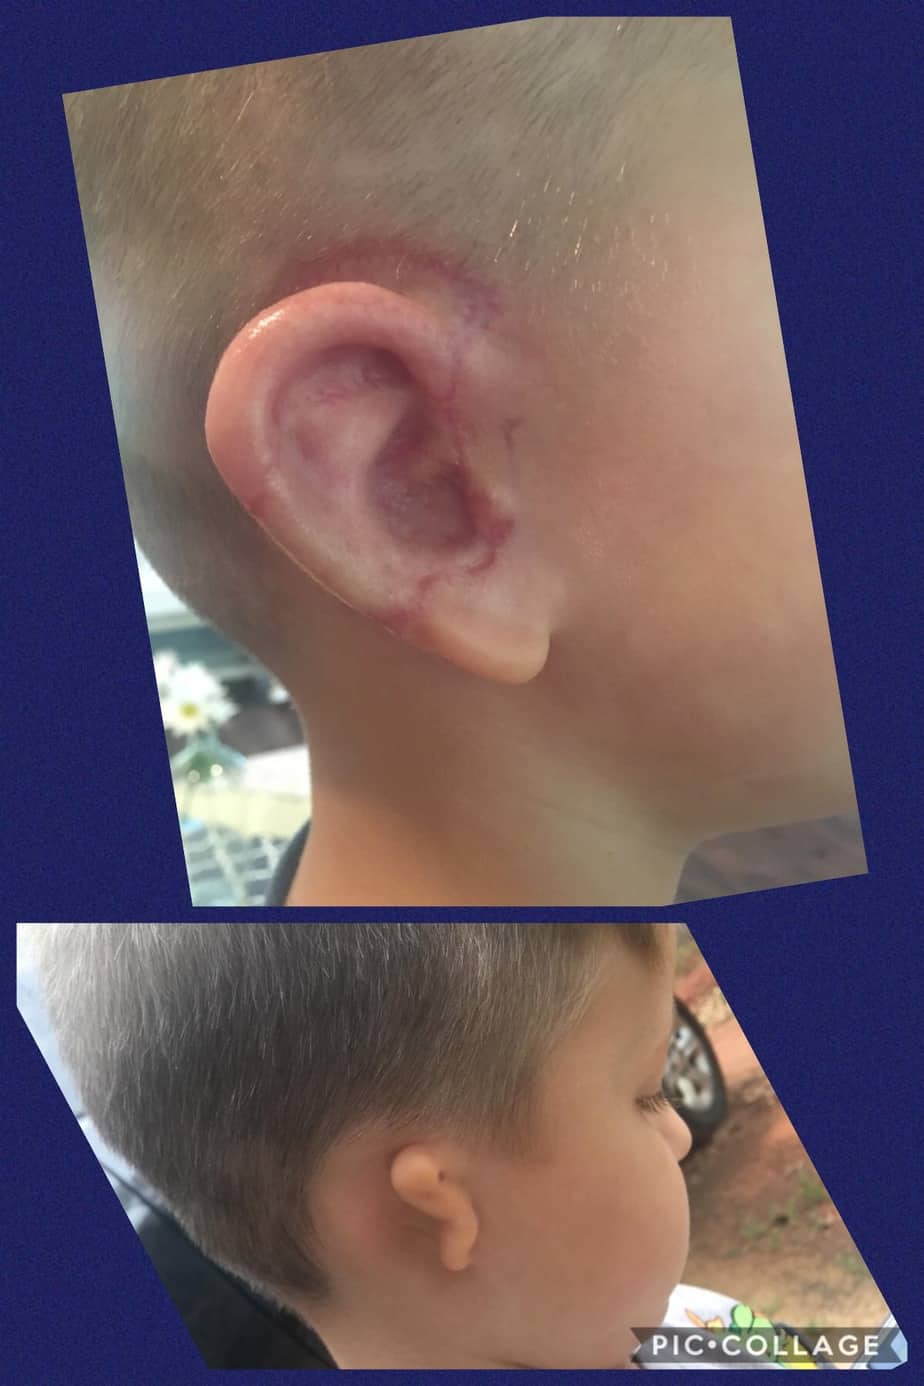 Before and after pictures of child with ear malformation at birth ear